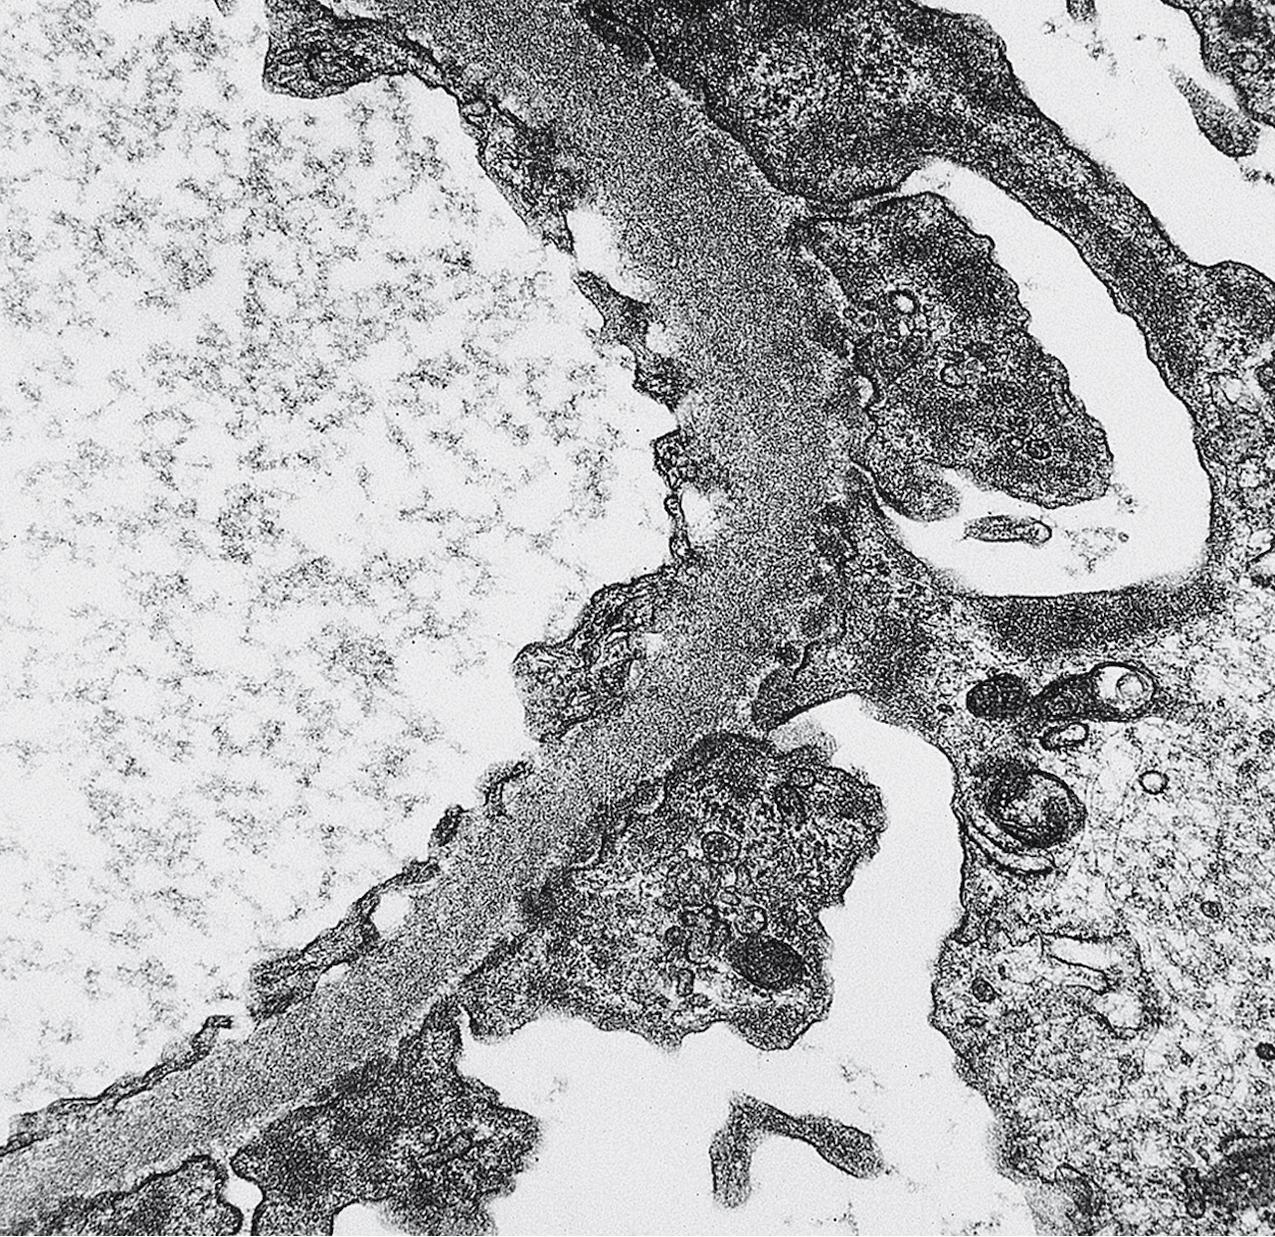 FIG. 3.83, Membranous nephropathy.